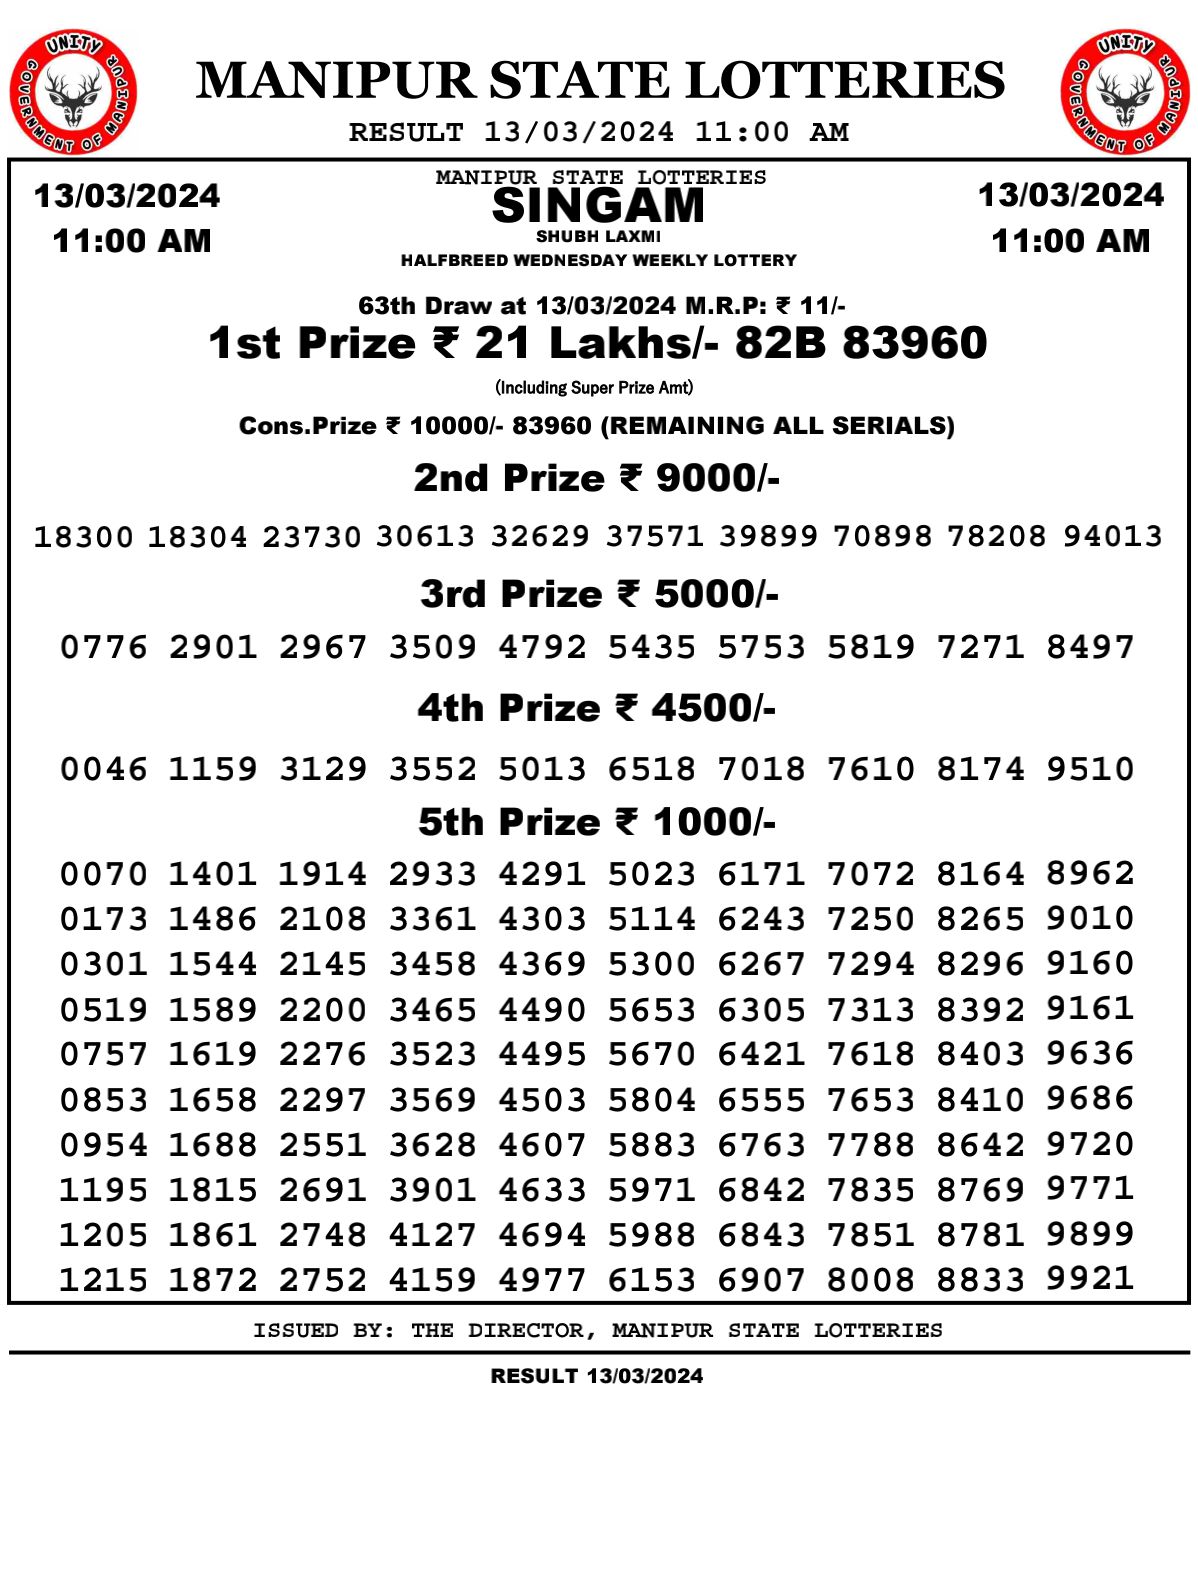 LIVE | Nagaland Lottery Result 16.02.2024: DEAR SEAGULL Friday Draw 8 PM  OUT - Ticket No. 47H 51007- Republic World